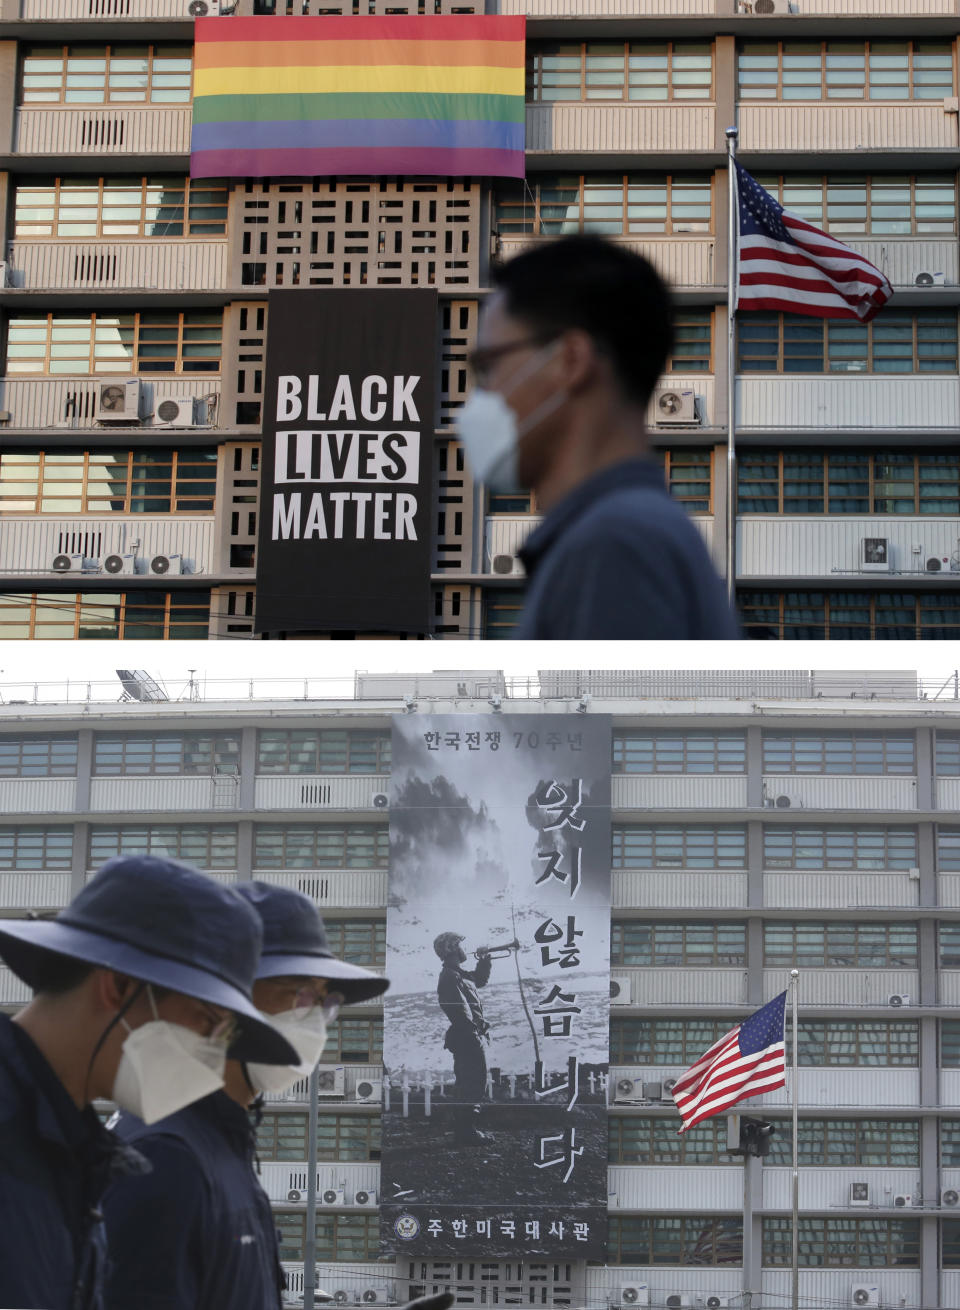 This combination of photos, top taken in Saturday, June 13, 2020, and bottom taken in Tuesday, June 16, 2020, shows banners over the U.S. Embassy building in Seoul. As protests over racial inequality roiled America, a large Black Lives Matter banner was quietly removed from the U.S. Embassy building in South Korea's capital three days after it was raised there in solidarity with demonstrators back home. The official explanation from the Embassy, which didn't mention an LGBT pride flag that was also taken away, was that the BLM banner was removed to avoid any perception that it was meant “to support or encourage donations to any specific organization.” On Tuesday, a banner marking the upcoming 70th anniversary of the start of the Korean War was draped from the Embassy. (AP Photo)